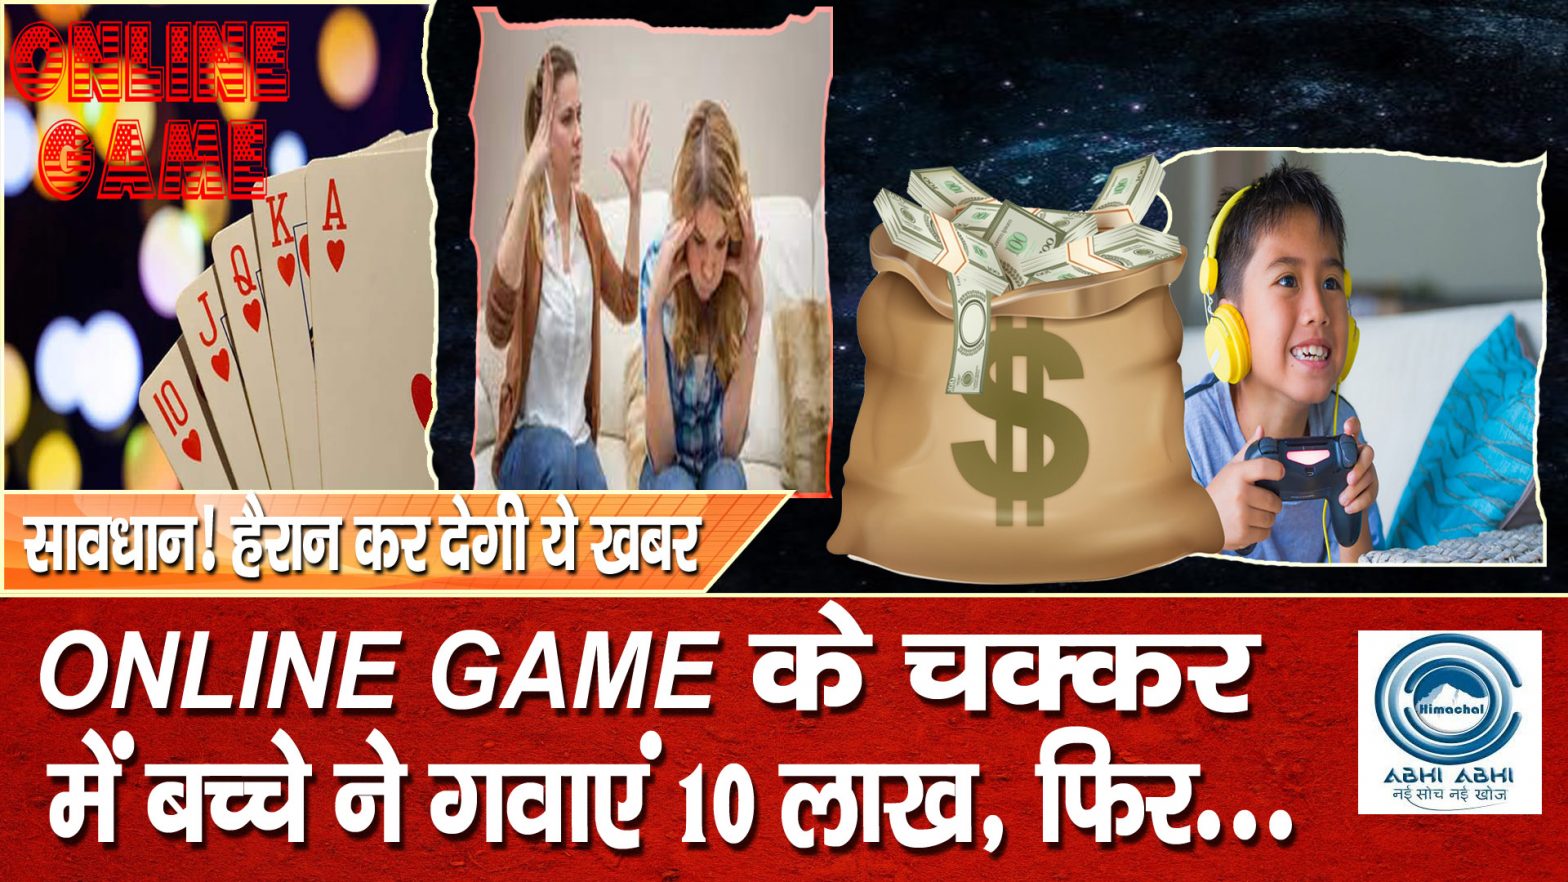 Online game|  child lost|  10 lakhs